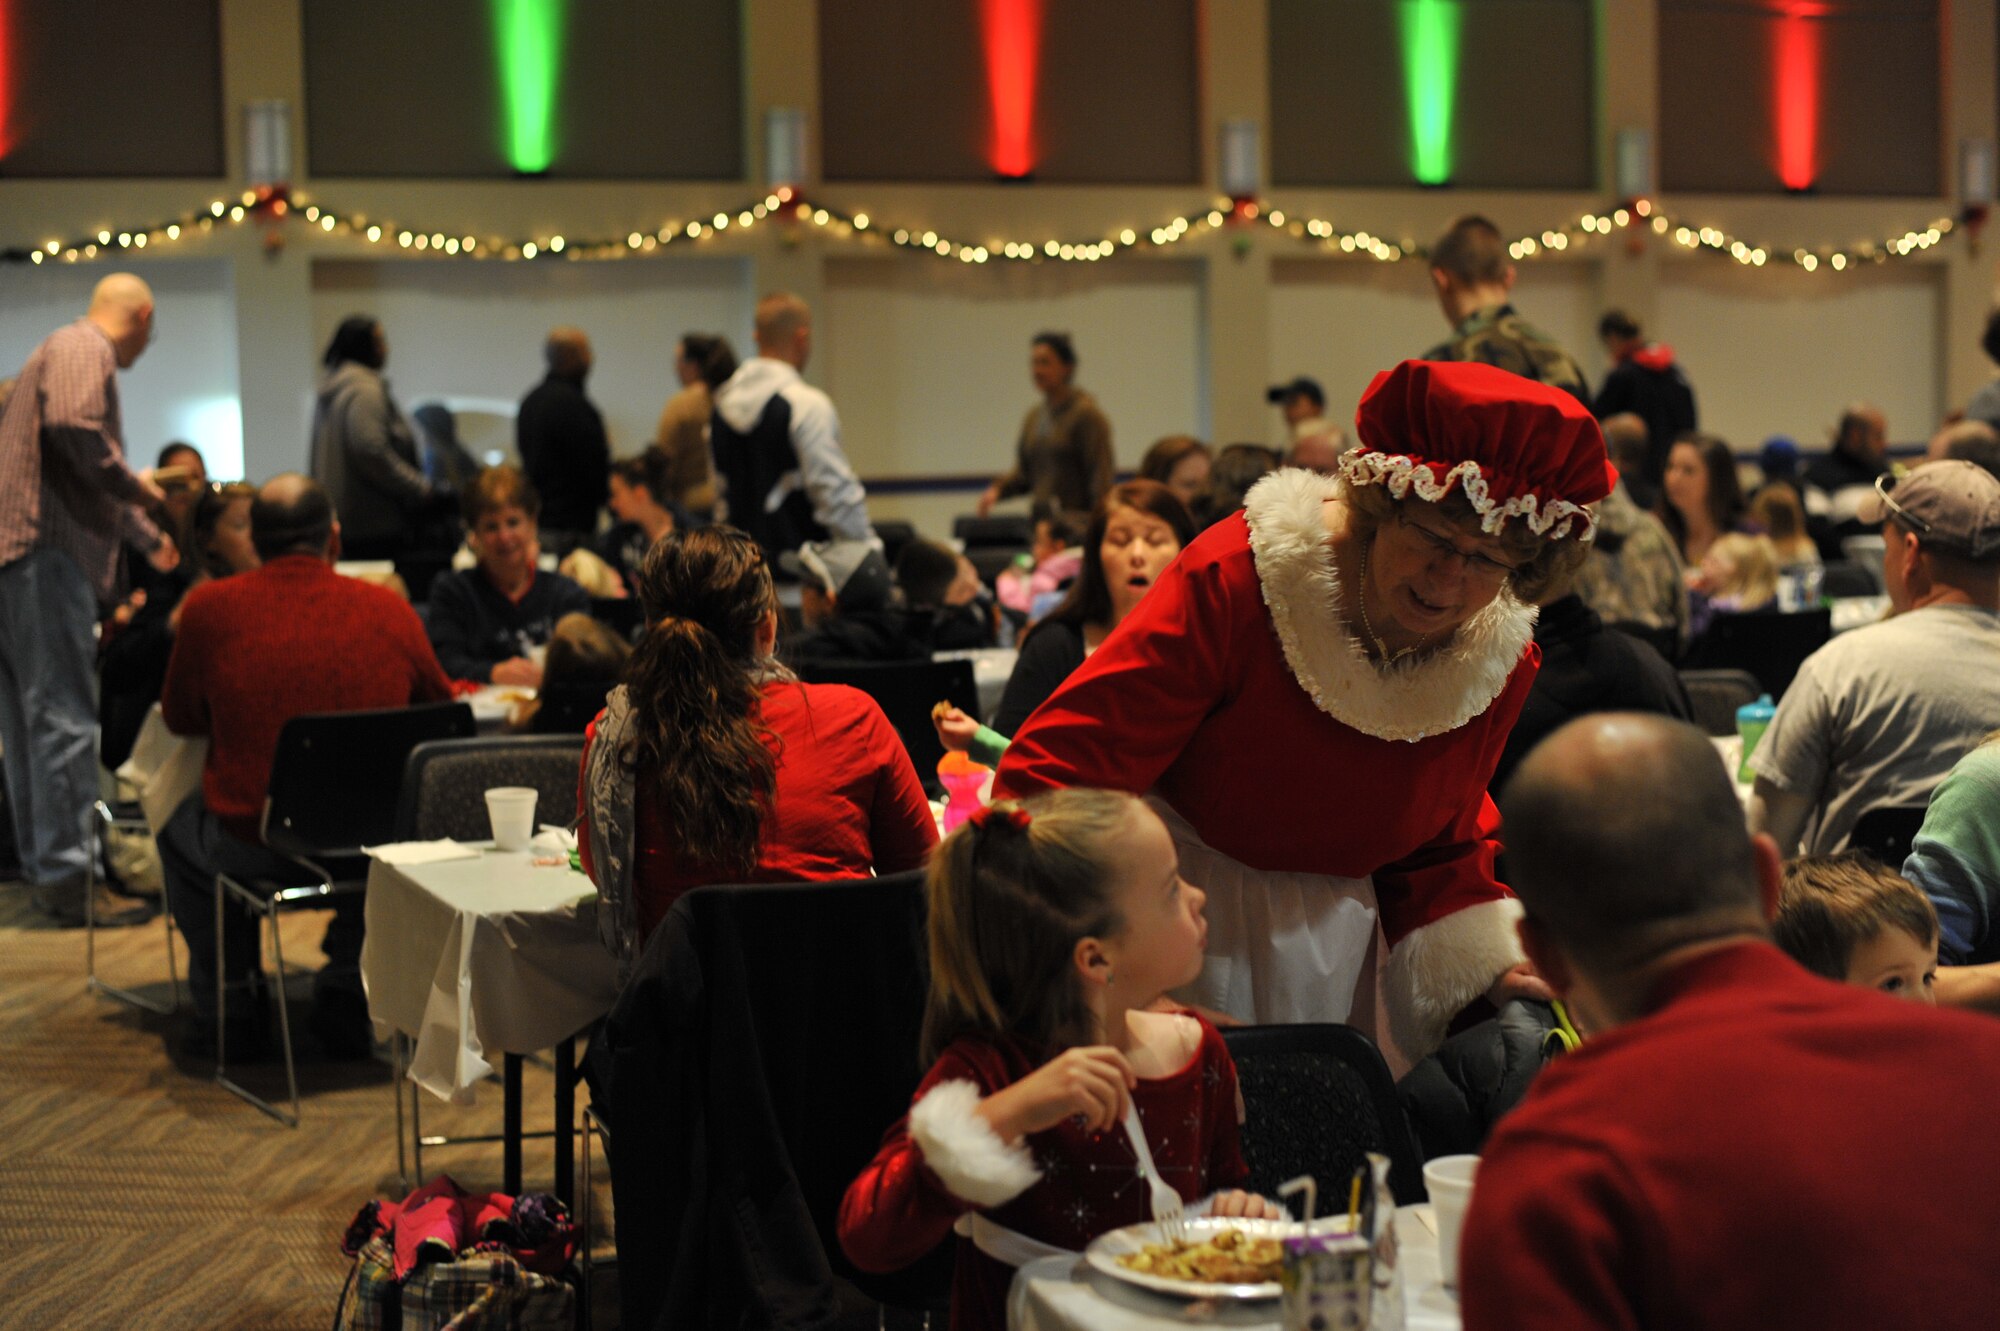 Mrs. Claus visits each table at the Breakfast with Santa event spreading hugs and smiles to each family that attended Dec. 14, 2013, at the Leadership Development Center on Buckley Air Force Base, Colo. Breakfast with Santa is an annual event coordinated by the 460th Force Support Squadron that provides families with a pancake breakfast, a visit with Santa, and a gift to every child. (U.S. Air Force Photo by Airman 1st Class Samantha Saulsbury/Released)